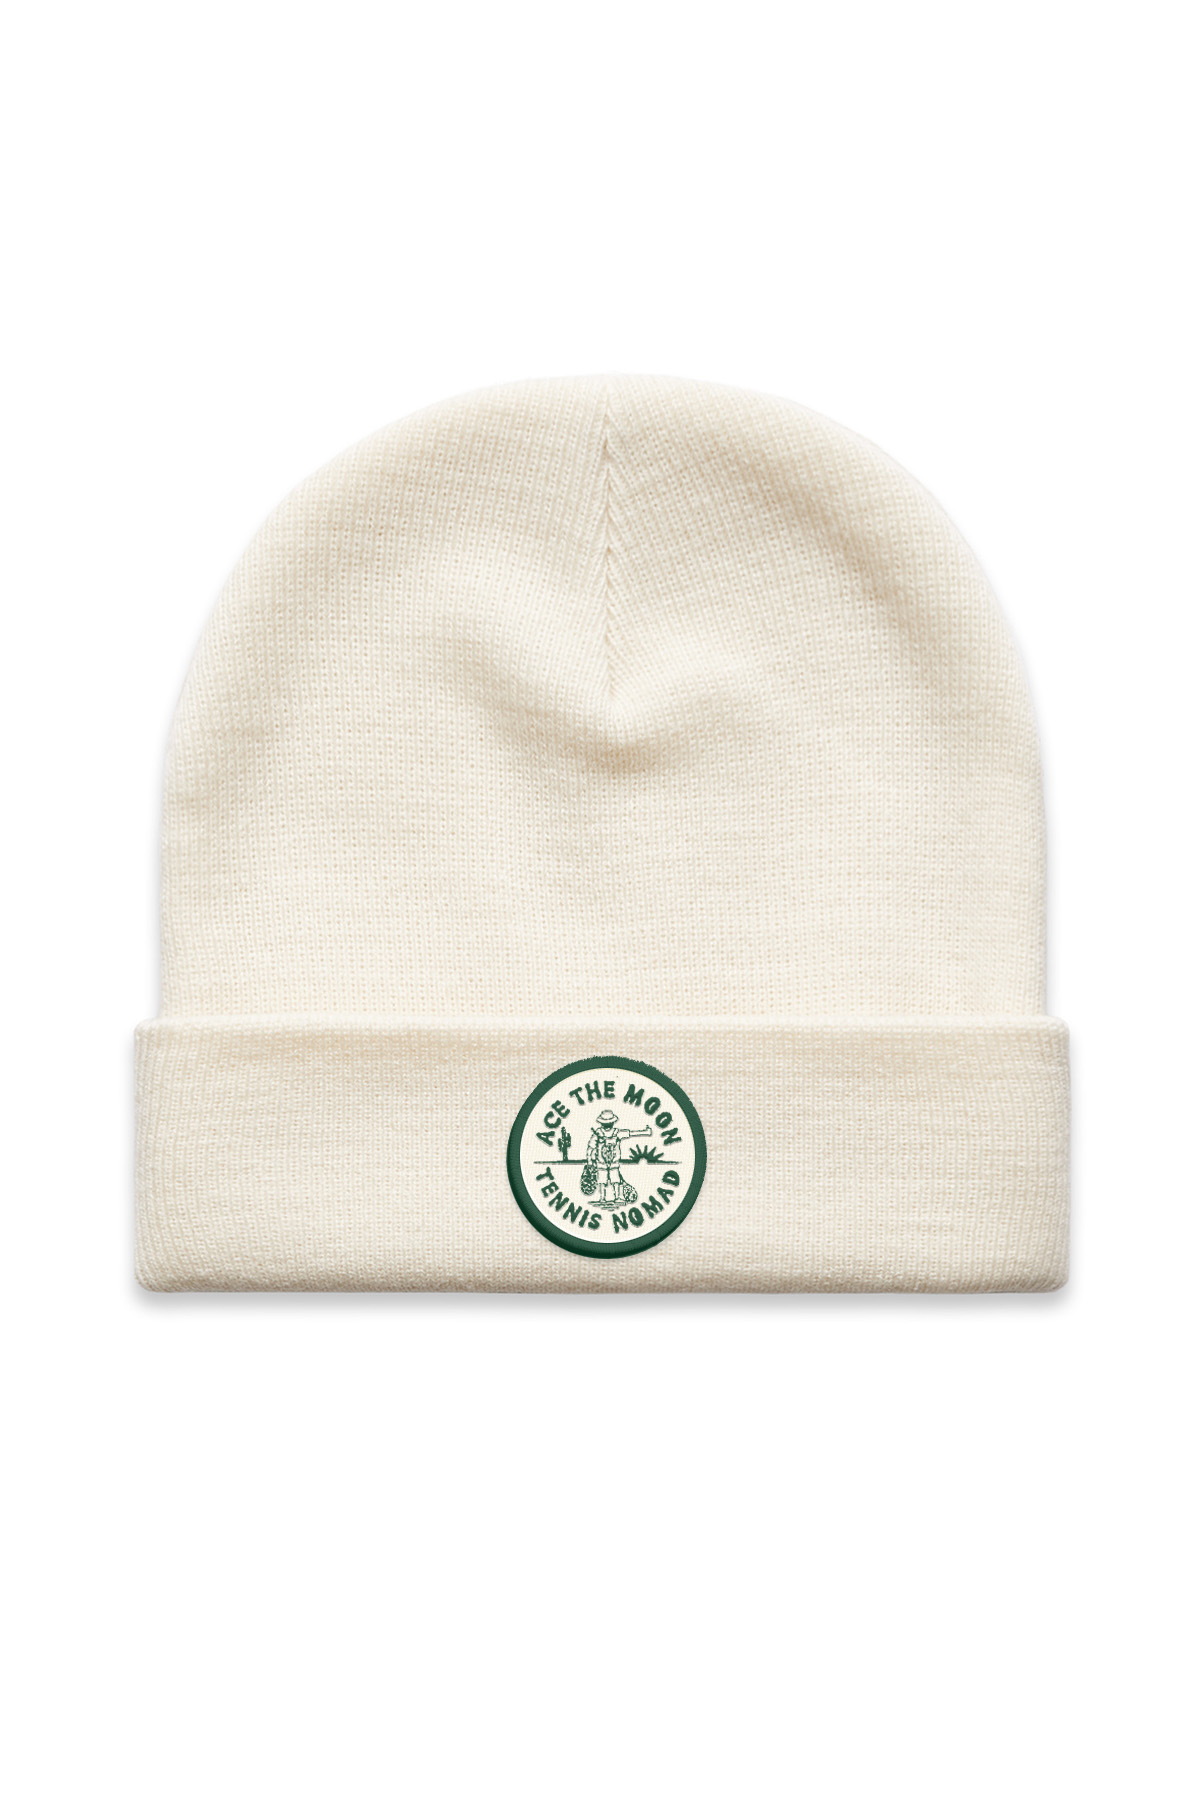 Tennis Nomad Patched Beanies